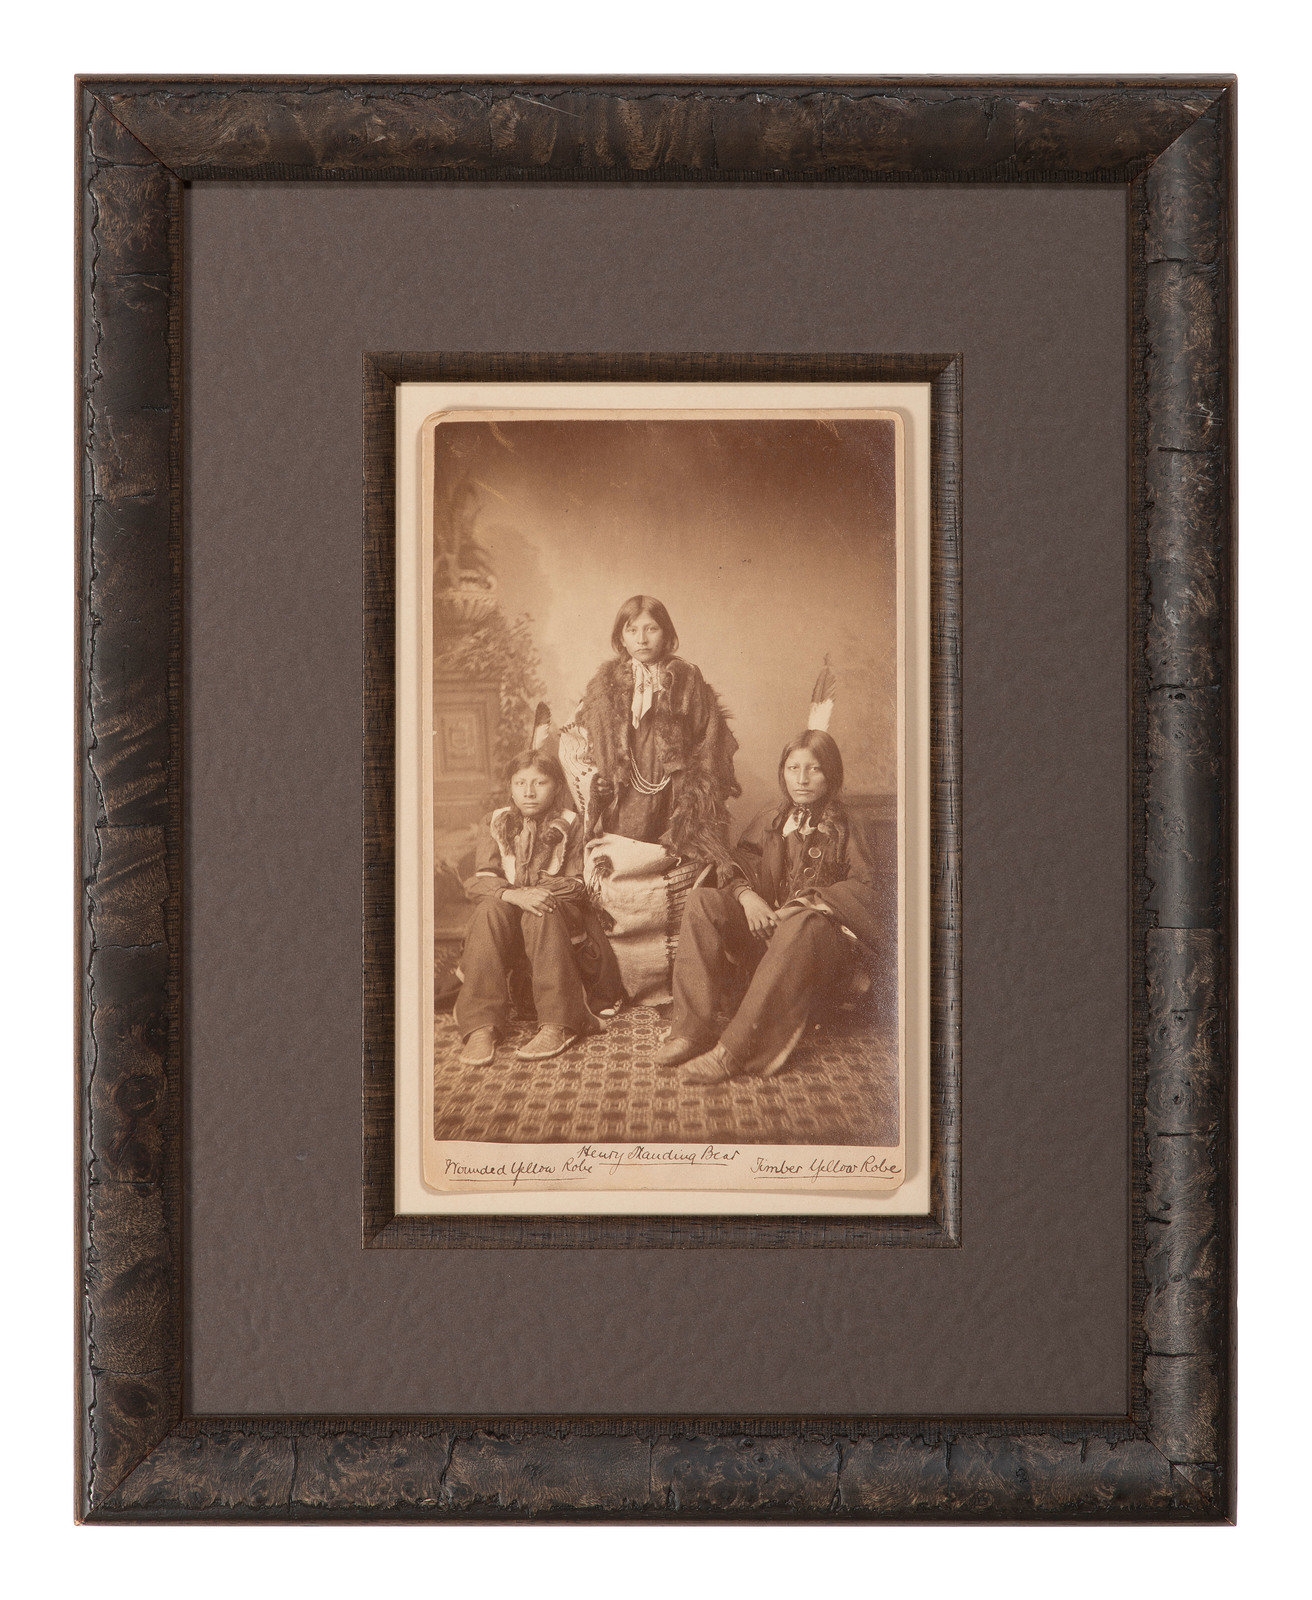 Boudoir card featuring a trio of Santee Sioux students of Carlisle Indian School, identified on mount as Henry Standing Bear - John Nicholas Choate